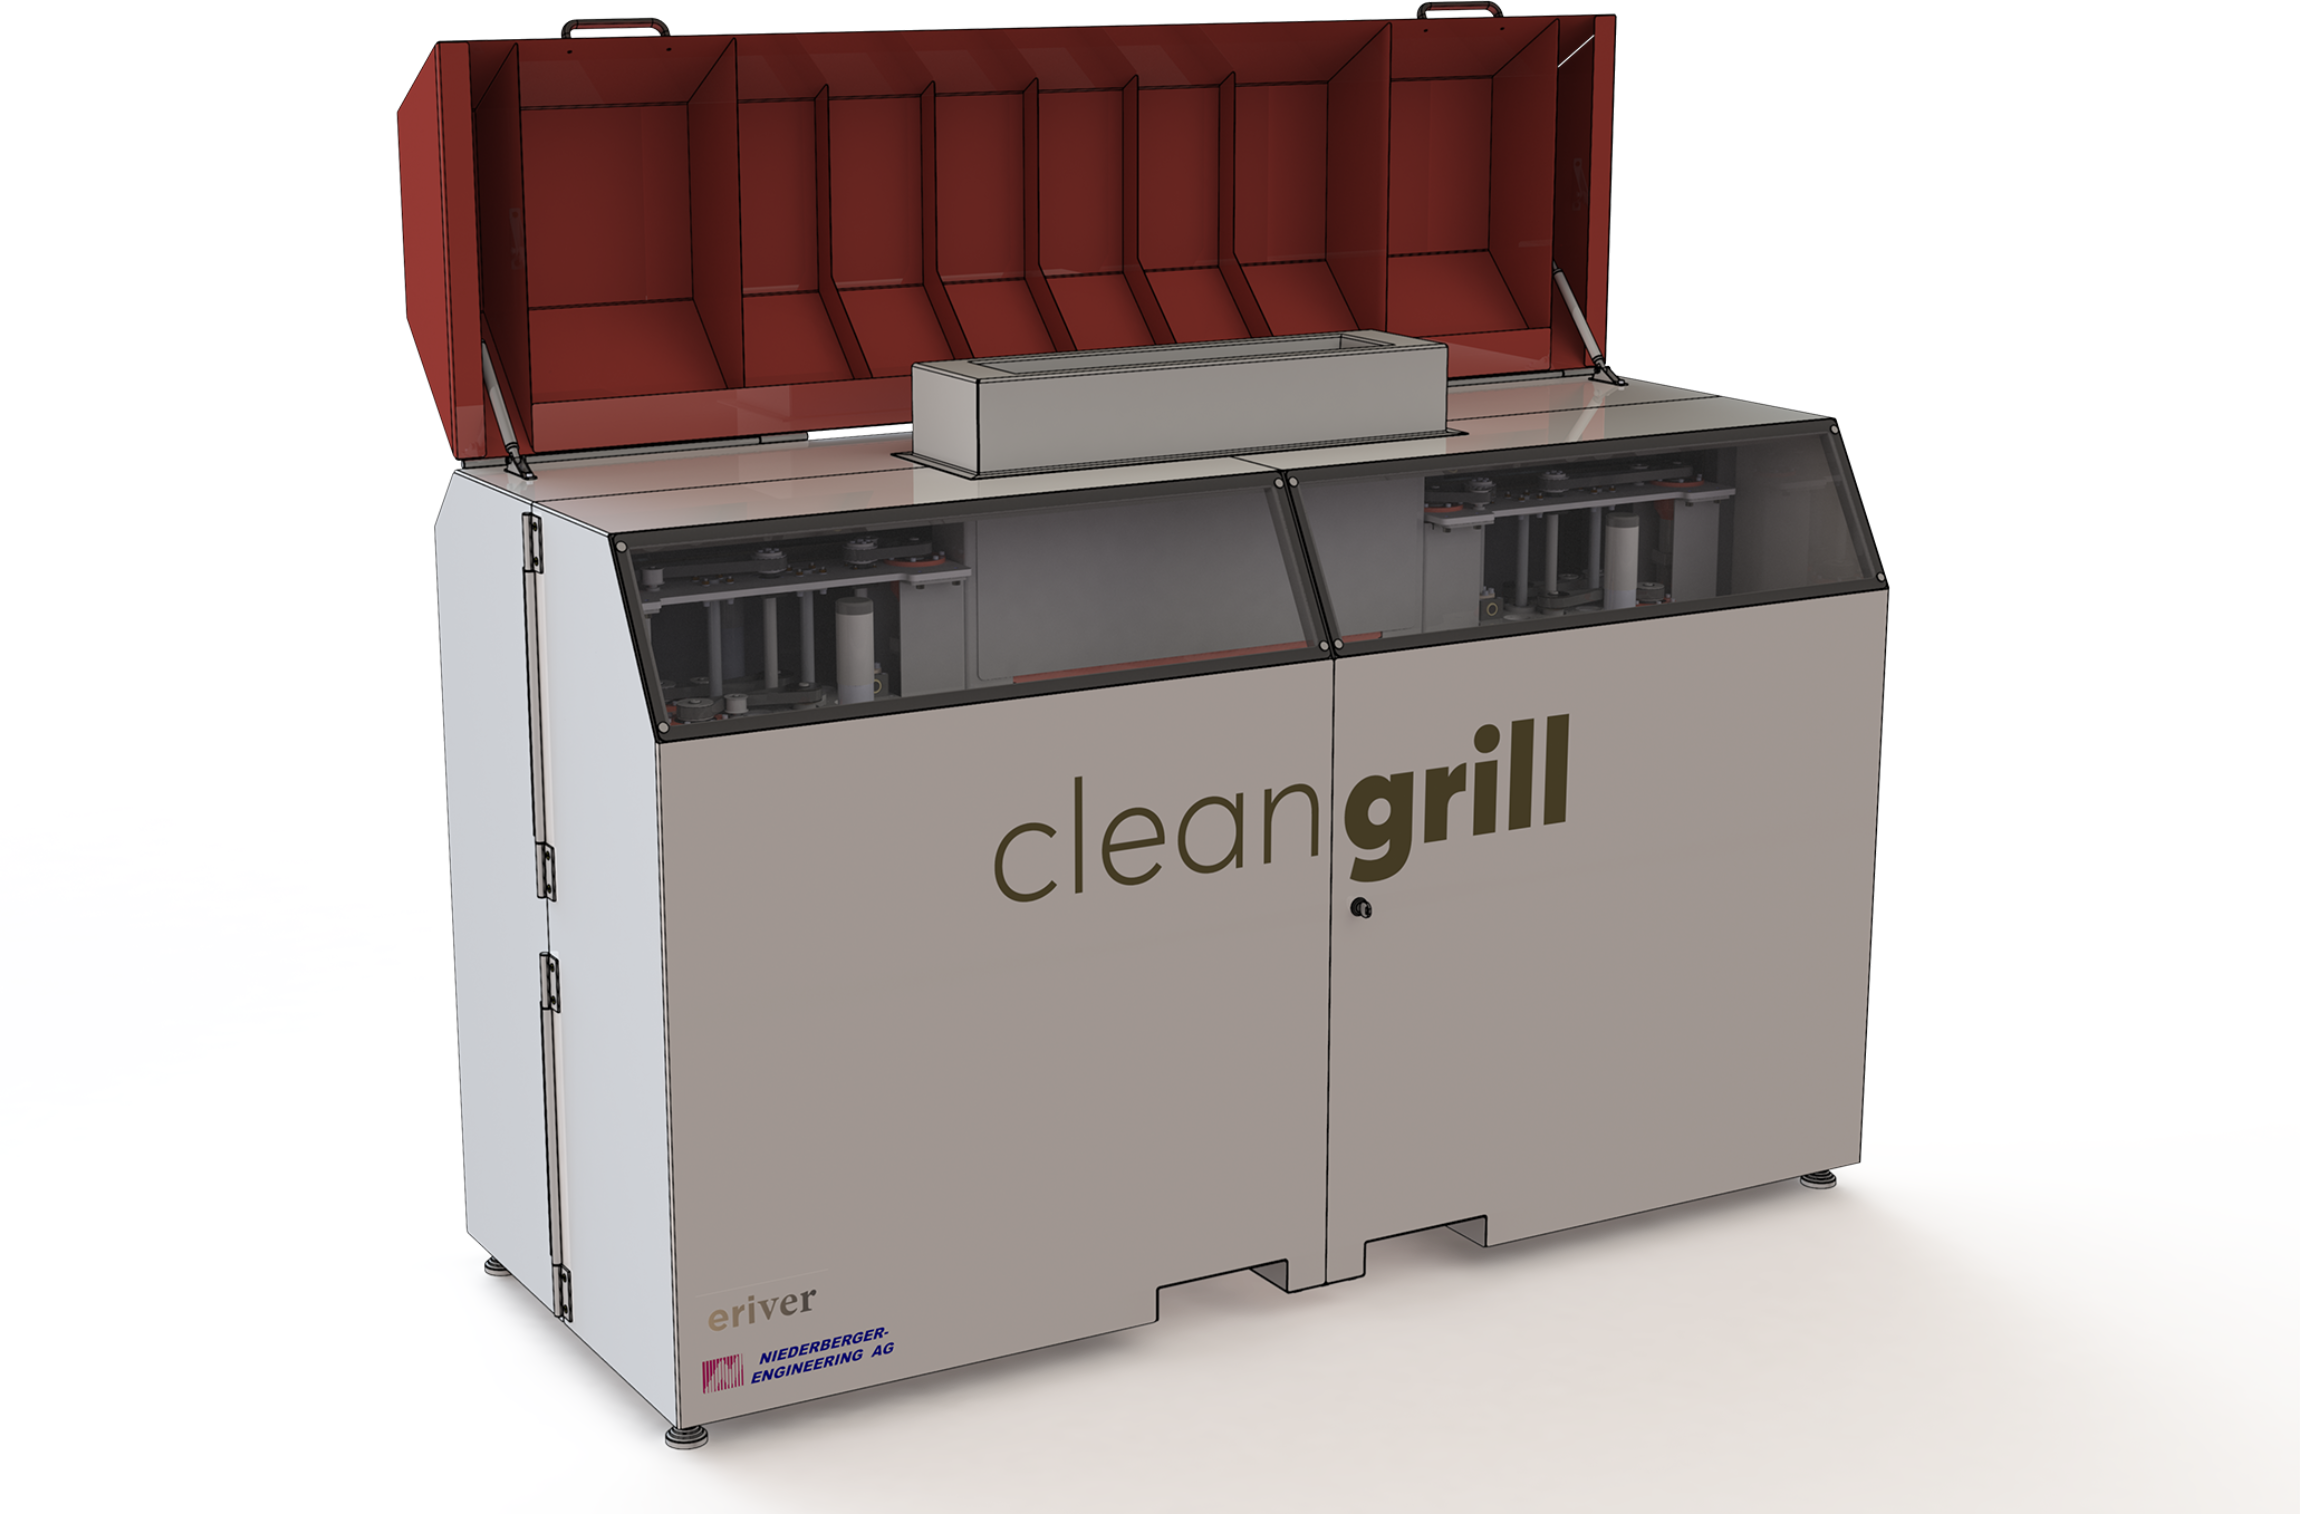 Cleangrill eriver hergiswil 05